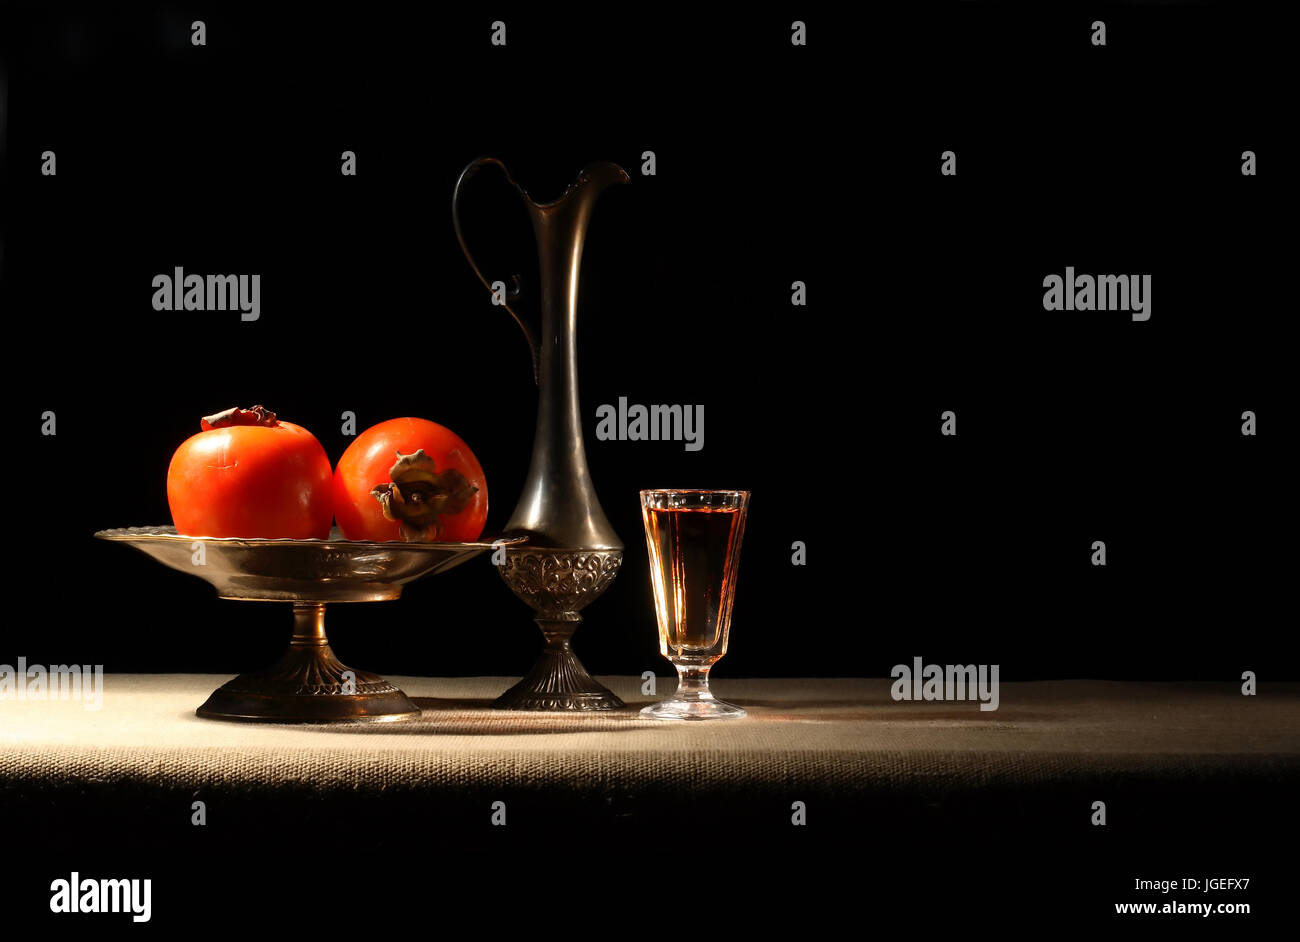 Antique vases with persommons near glass of wine on dark background Stock Photo